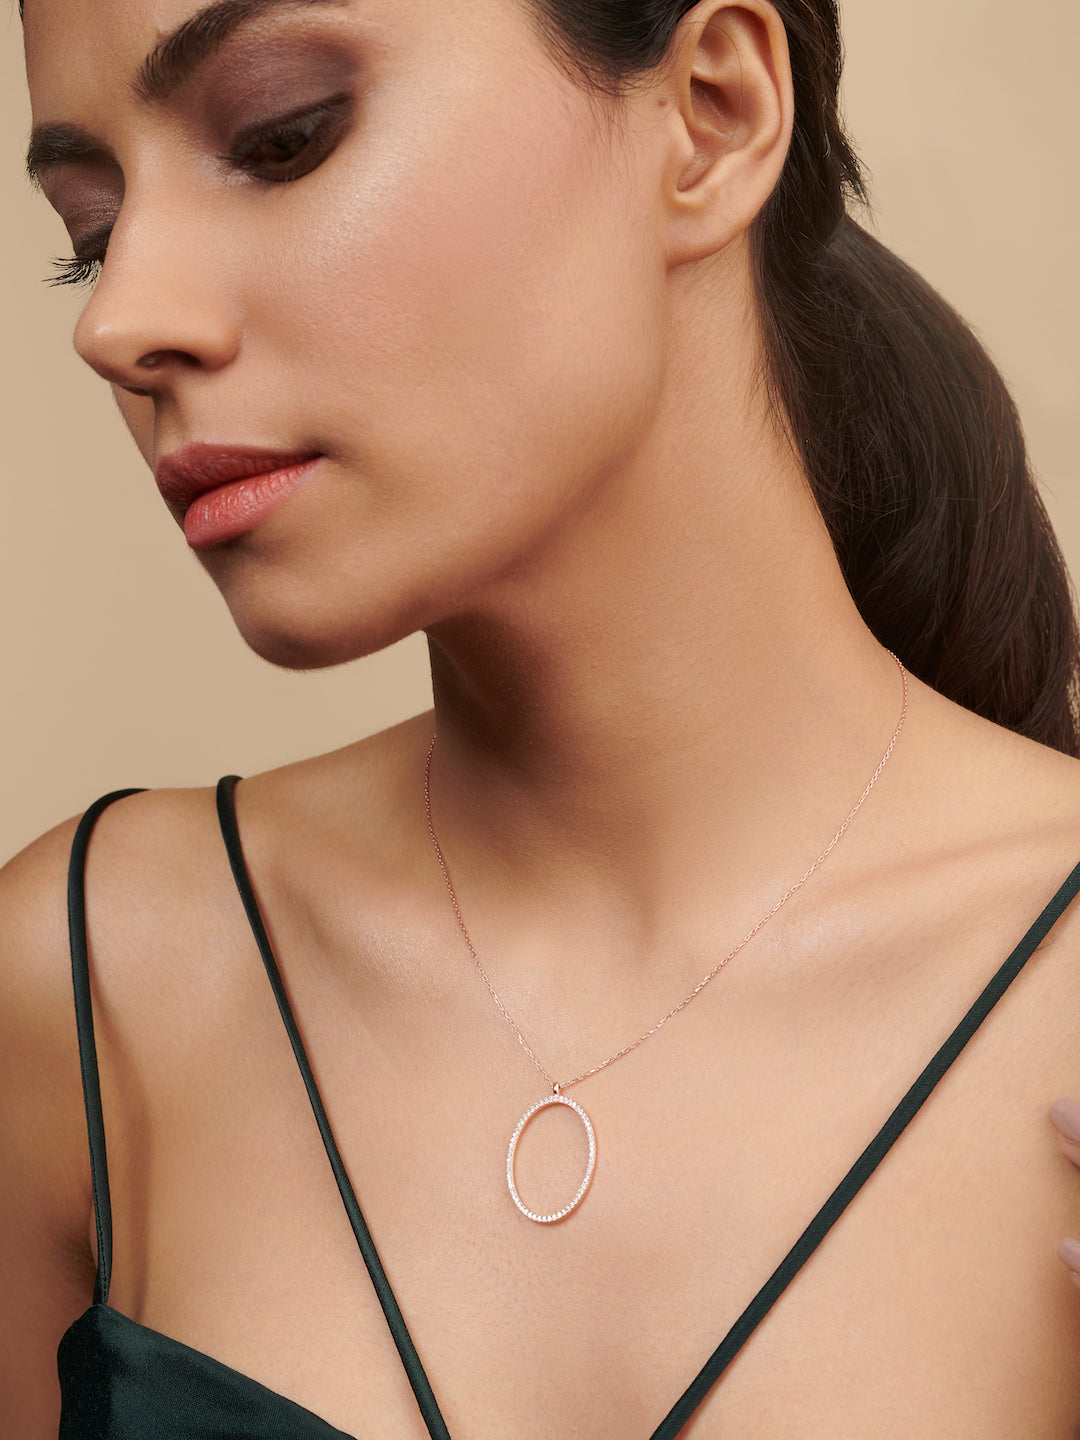  Pure Silver Loop Necklace Embellished With Cubic Zirconia Stones